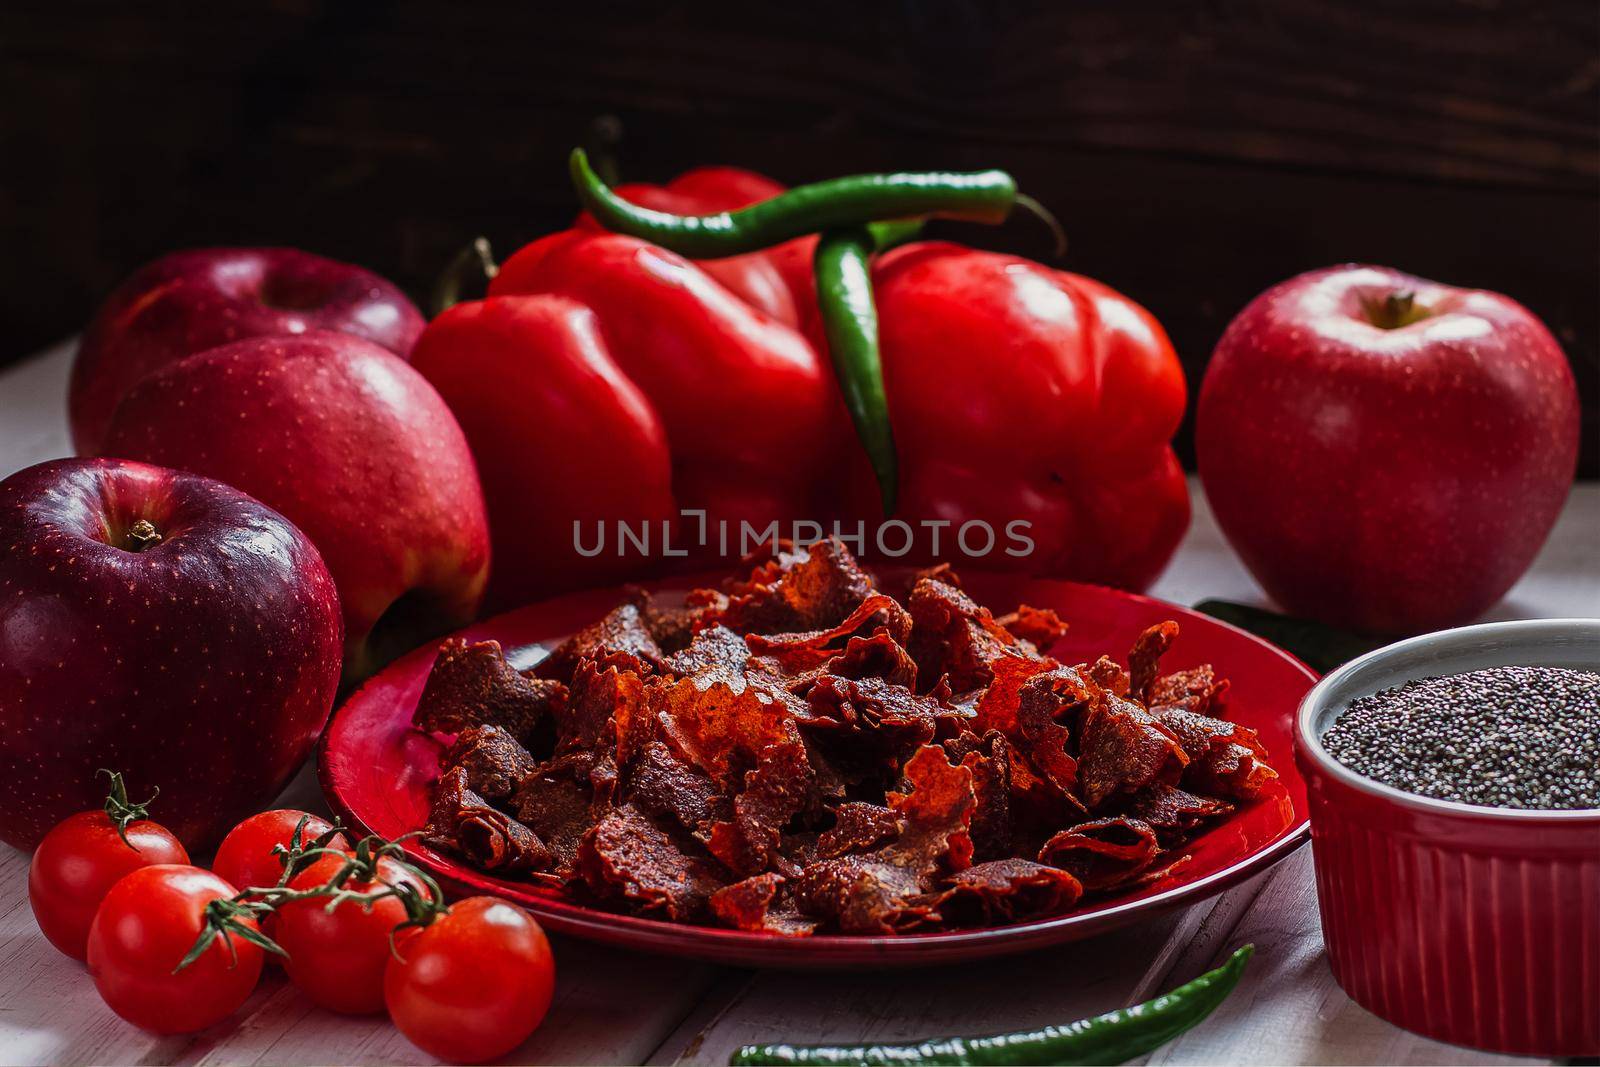 Sun-dried tomatoes with paprikas and chilly peppers on red plate.